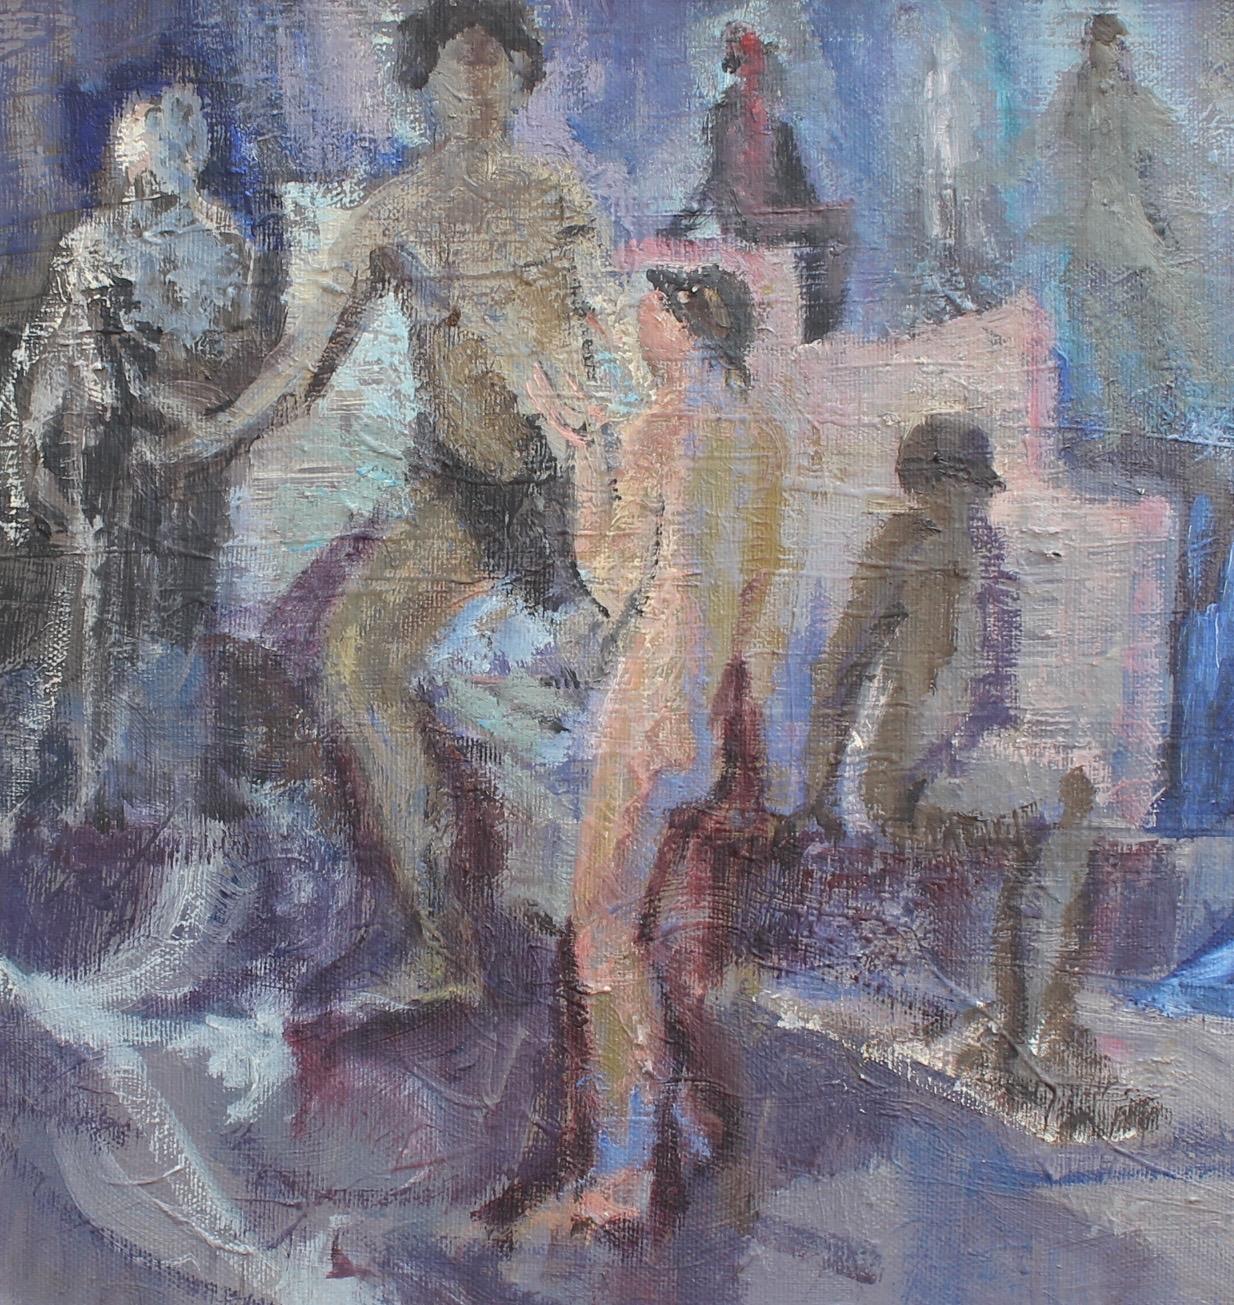 'Inspiration', oil on canvas (circa 1970s), by Locatelli. This piece was obtained in the south of France. The art is of the period in which vivid colour was at the vanguard. Here there are purples and blues which set the stage for this very